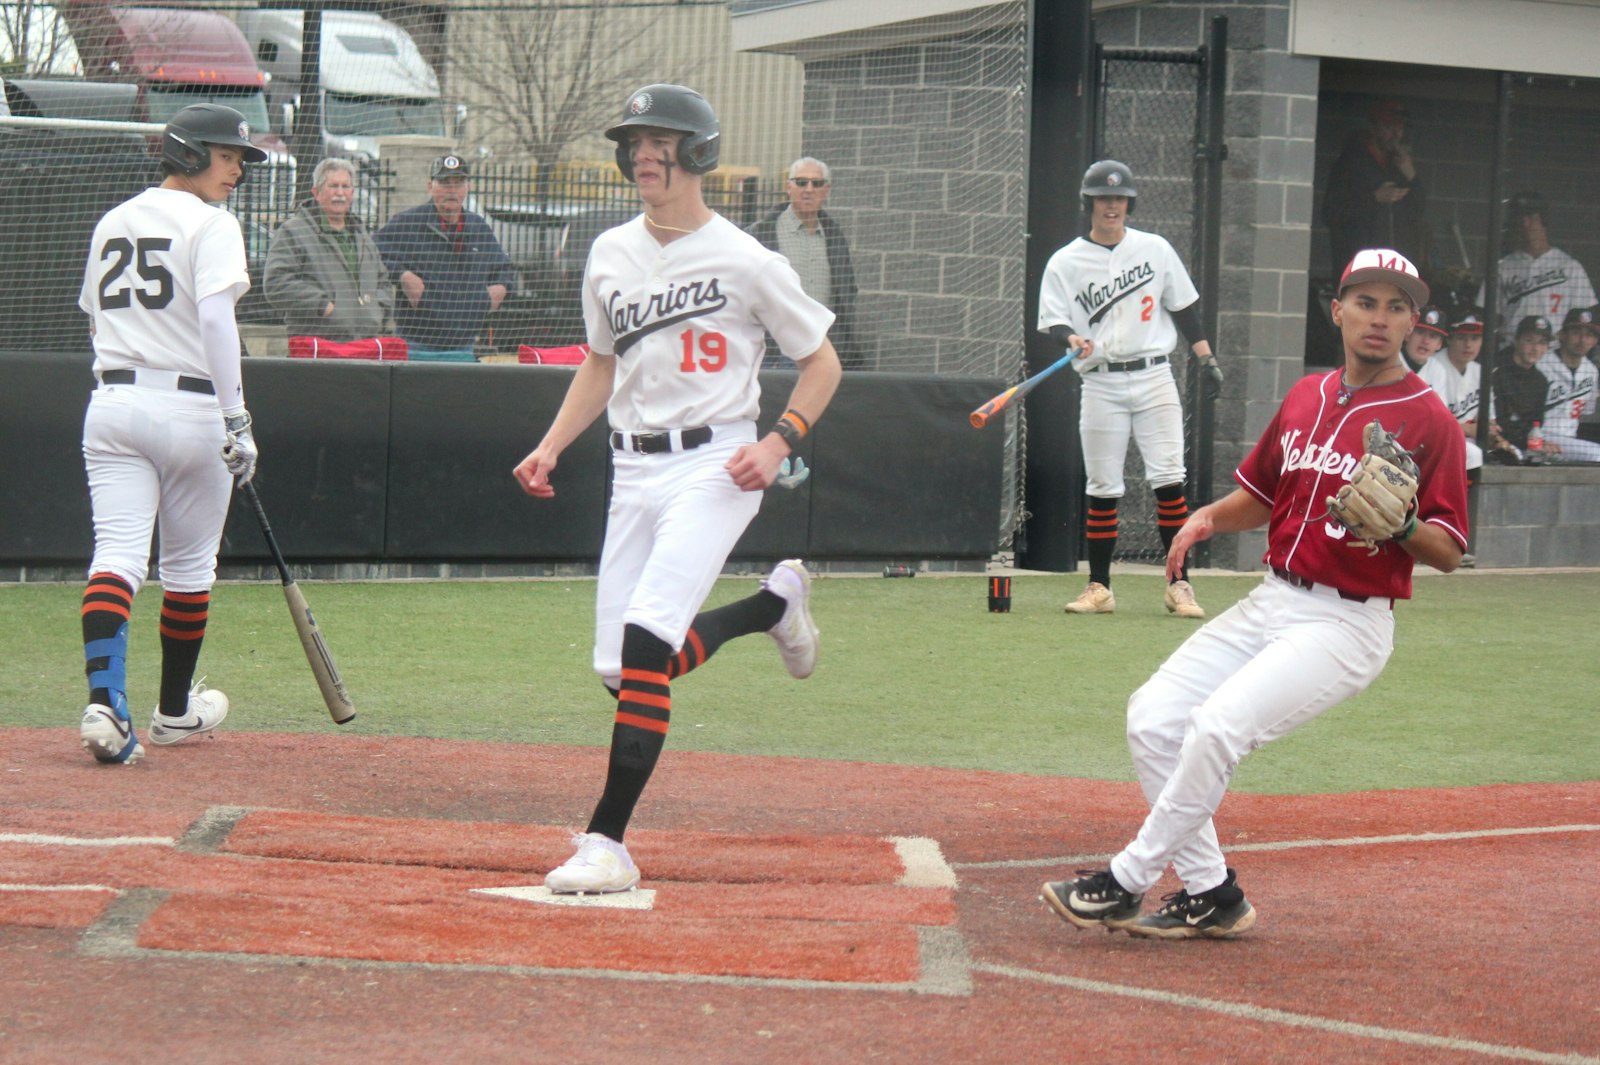 Chase VanAmeyde scores the go-ahead run in the bottom of the fifth inning to give Brother Rice a 4-3 lead against Detroit Western. The Warriors went on to score nine more times and end the game early.